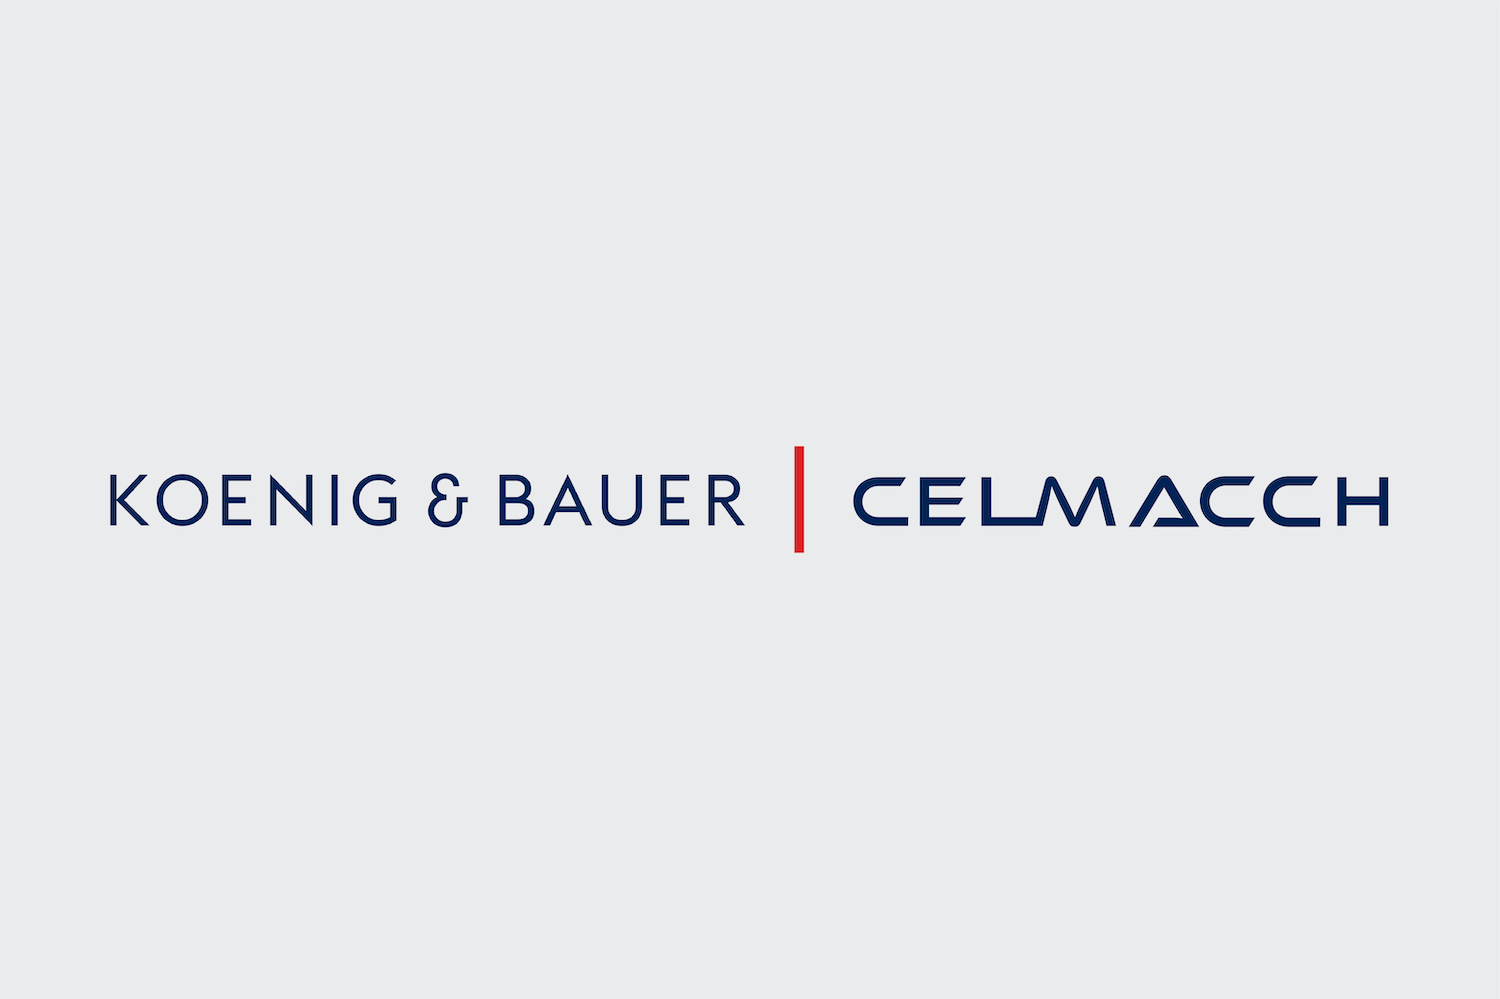 Koenig & Bauer Celmacch: Closing successfully completed